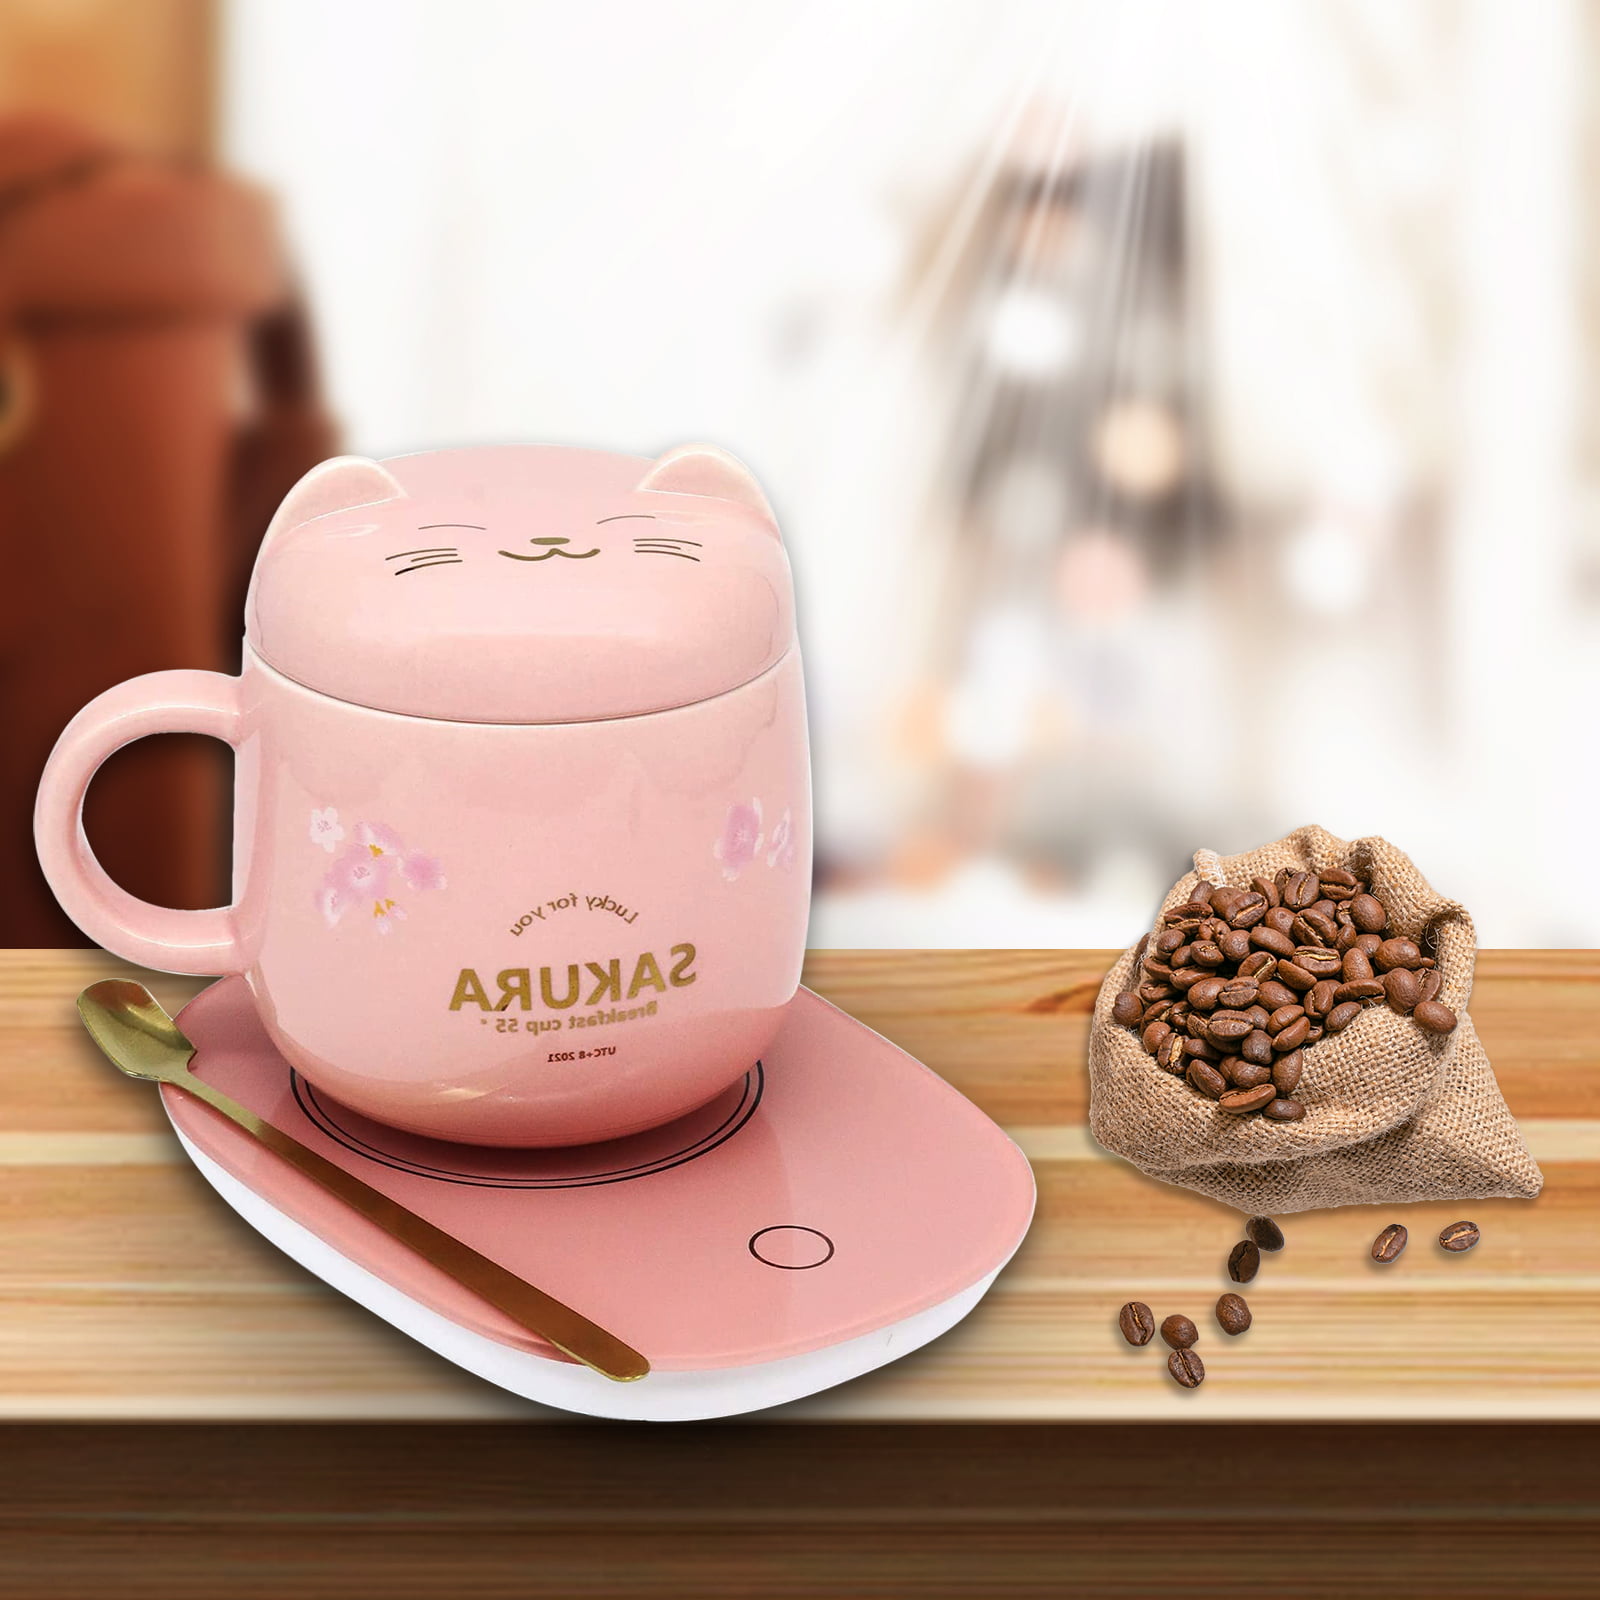 Coffee Mug Warmer Set Milk Cup Warmer Set for Office Home Use Pink with Stainless Steel Spoon and Mug 12.5 oz 